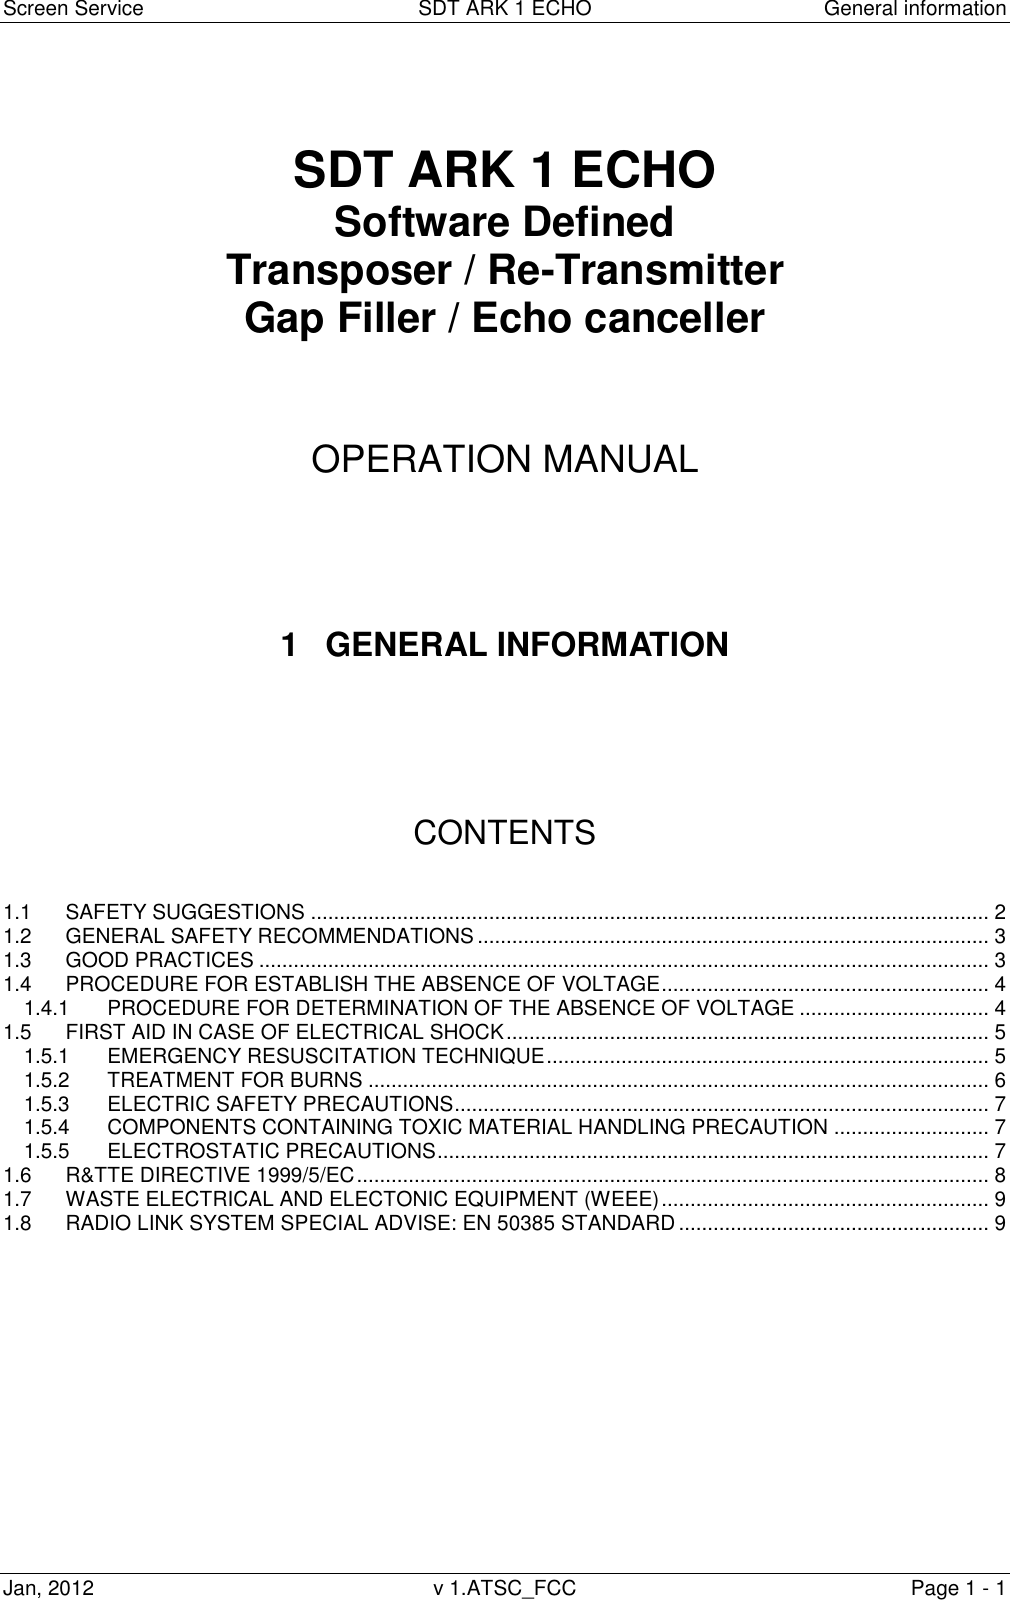 Screen Service  SDT ARK 1 ECHO  General information Jan, 2012  v 1.ATSC_FCC  Page 1 - 1    SDT ARK 1 ECHO Software Defined Transposer / Re-Transmitter Gap Filler / Echo canceller     OPERATION MANUAL      1  GENERAL INFORMATION       CONTENTS   1.1 SAFETY SUGGESTIONS ...................................................................................................................... 2 1.2 GENERAL SAFETY RECOMMENDATIONS ......................................................................................... 3 1.3 GOOD PRACTICES ............................................................................................................................... 3 1.4 PROCEDURE FOR ESTABLISH THE ABSENCE OF VOLTAGE ......................................................... 4 1.4.1 PROCEDURE FOR DETERMINATION OF THE ABSENCE OF VOLTAGE ................................. 4 1.5 FIRST AID IN CASE OF ELECTRICAL SHOCK .................................................................................... 5 1.5.1 EMERGENCY RESUSCITATION TECHNIQUE ............................................................................. 5 1.5.2 TREATMENT FOR BURNS ............................................................................................................ 6 1.5.3 ELECTRIC SAFETY PRECAUTIONS ............................................................................................. 7 1.5.4 COMPONENTS CONTAINING TOXIC MATERIAL HANDLING PRECAUTION ........................... 7 1.5.5 ELECTROSTATIC PRECAUTIONS ................................................................................................ 7 1.6 R&amp;TTE DIRECTIVE 1999/5/EC .............................................................................................................. 8 1.7 WASTE ELECTRICAL AND ELECTONIC EQUIPMENT (WEEE) ......................................................... 9 1.8 RADIO LINK SYSTEM SPECIAL ADVISE: EN 50385 STANDARD ...................................................... 9             